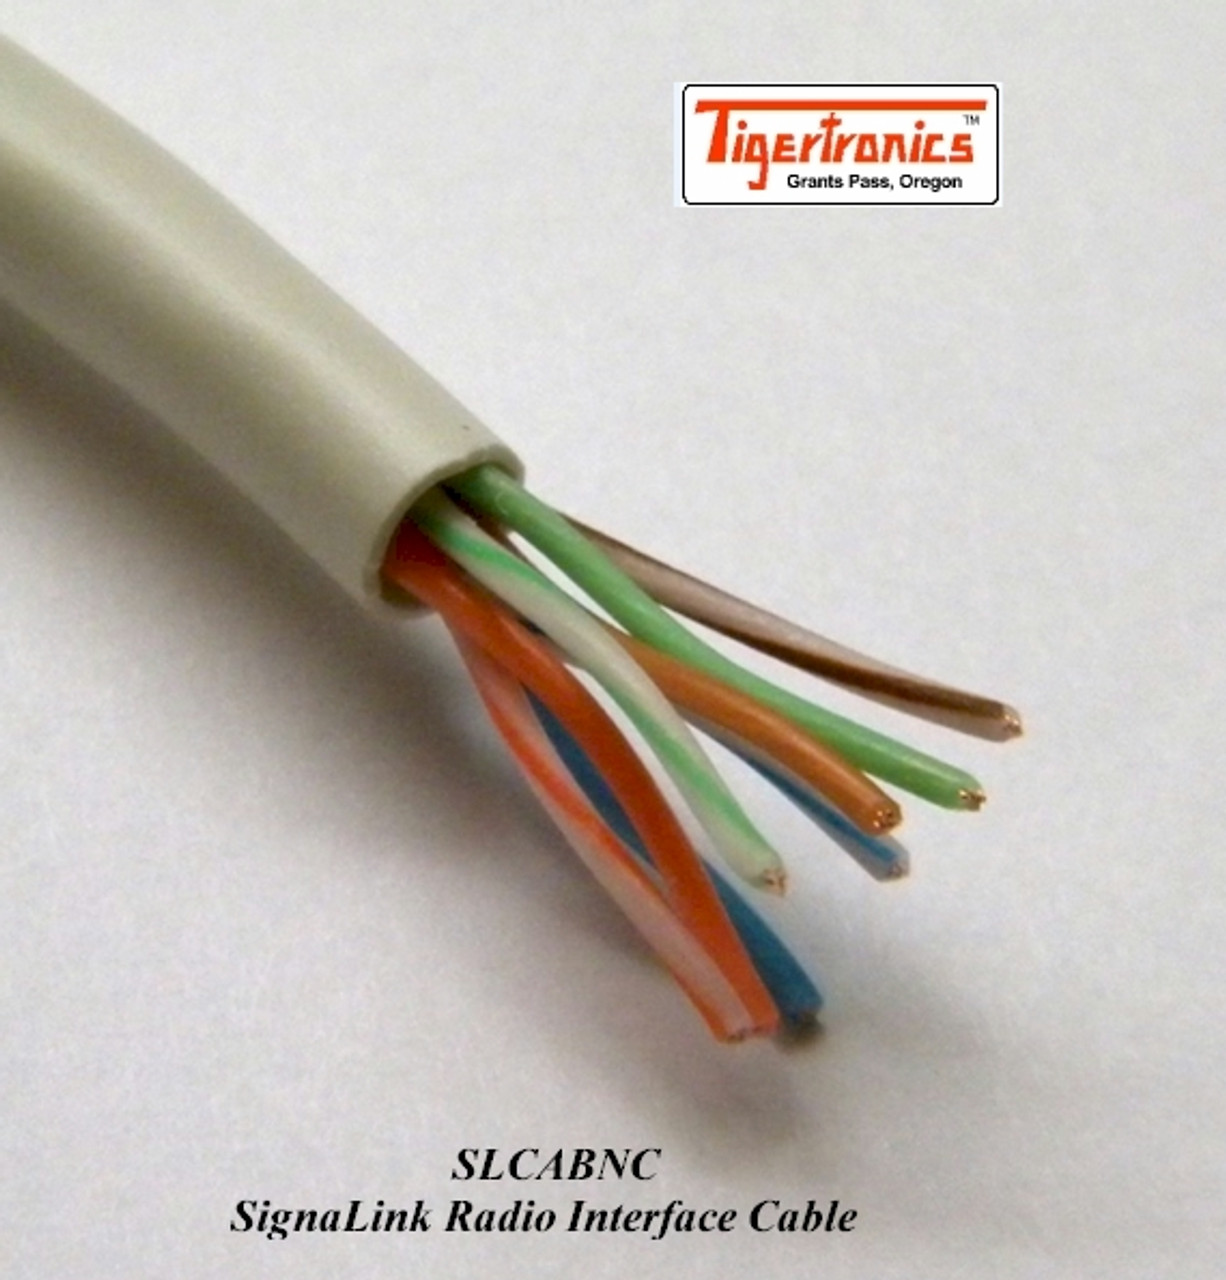 SLCABNC Cable -This Cable is designed to work with the SignaLink USB sound card radio interface. It is ~3 feet in length and has an un-terminated radio cable (no connector on the radio end) for building your own radio cable